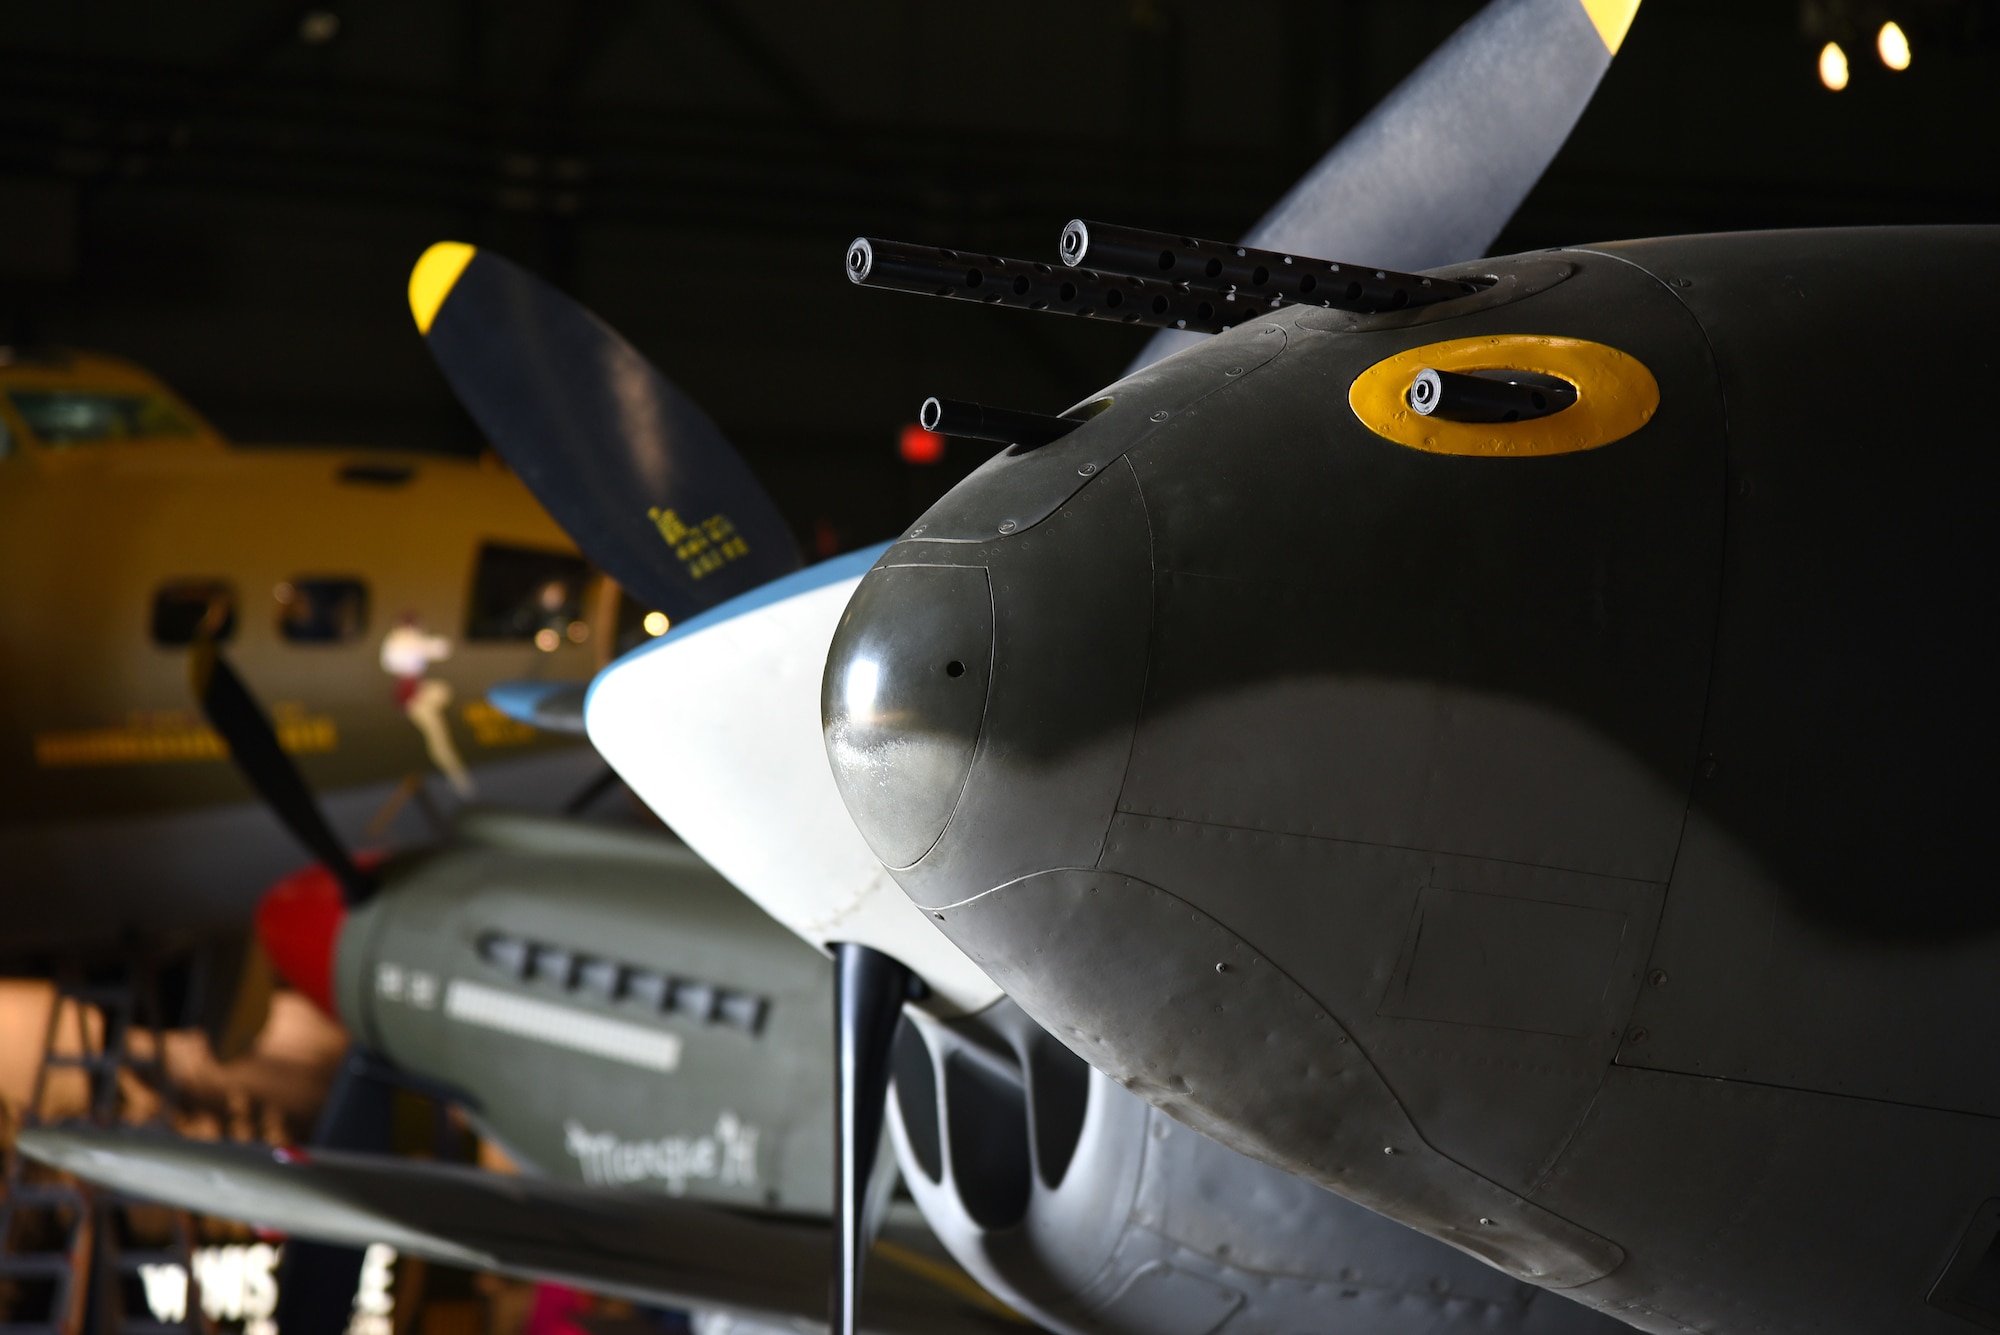 A view of the Lockheed P-38L Lightning in the WWII Gallery at the National Museum of the U.S. Air Force during the move back to the gallery on Aug. 13, 2018. Several WWII era aircraft on display were temporarily placed throughout the museum to provide adequate space for the Memphis Belle exhibit opening events. (U.S. Air Force photo by Ken LaRock)